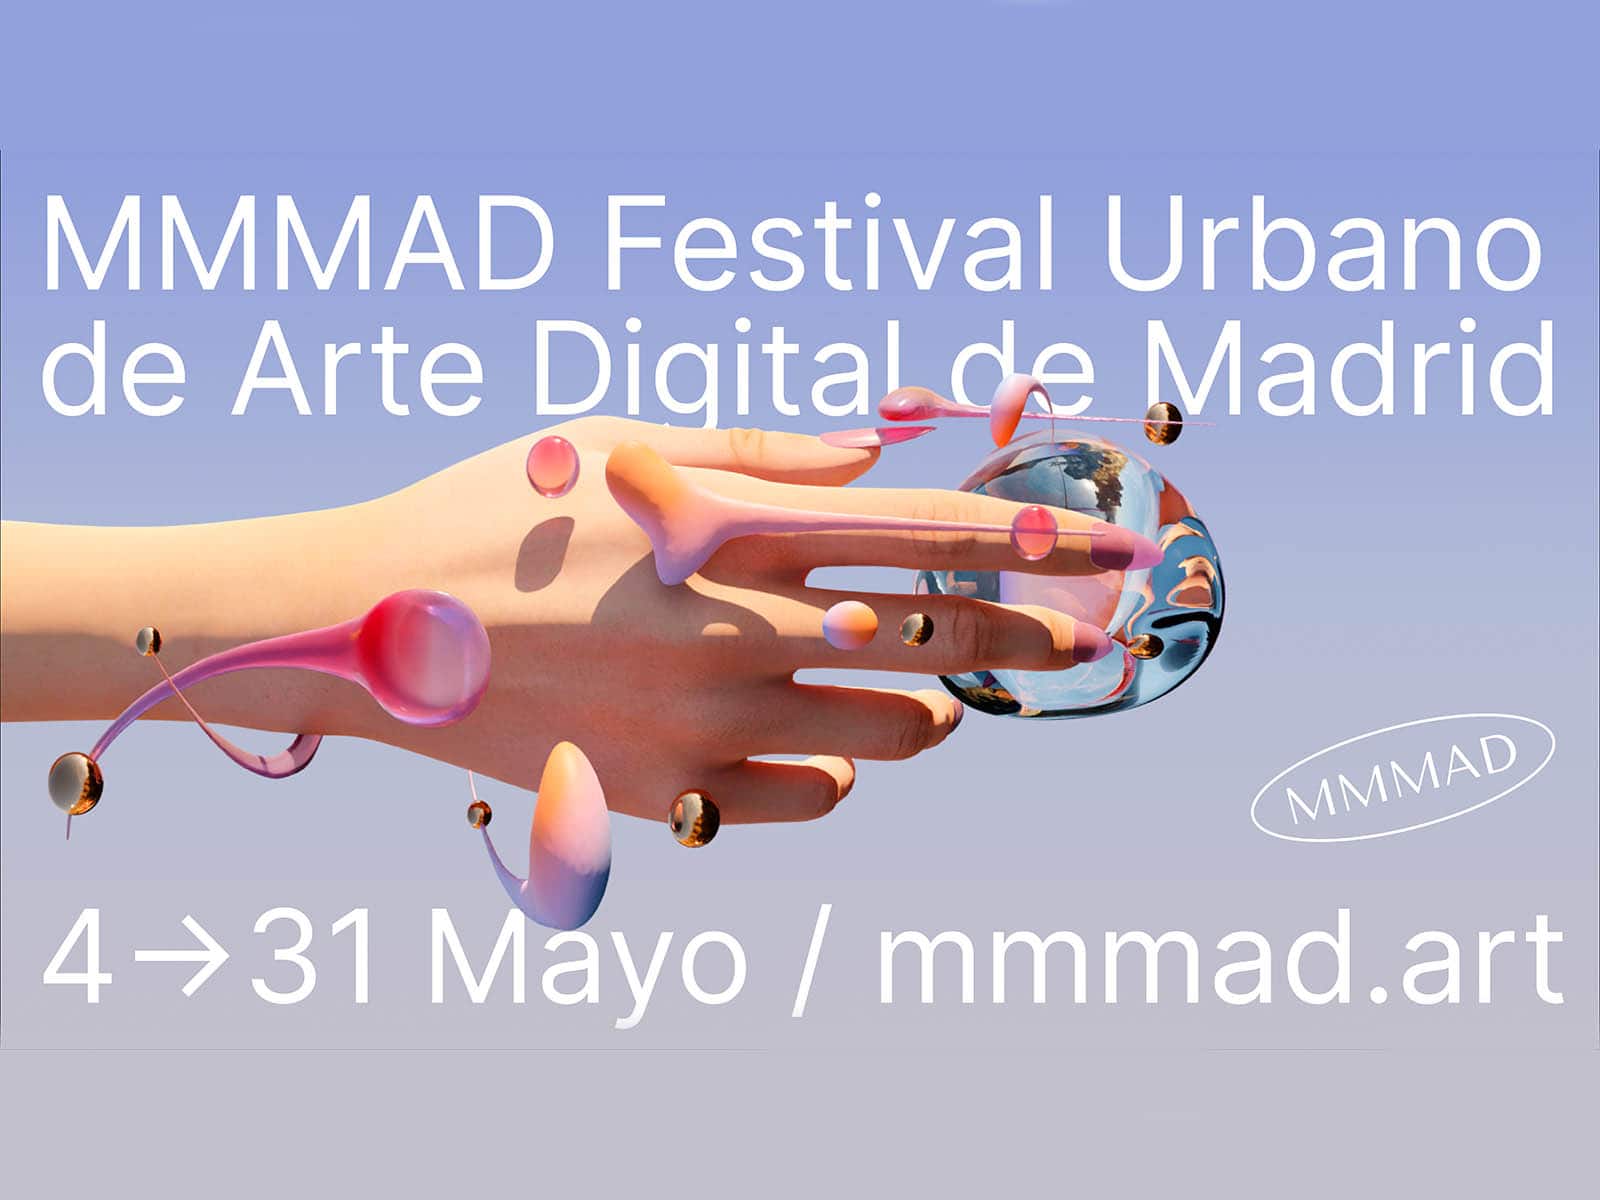 MMMAD: digital art, performance, live music and more